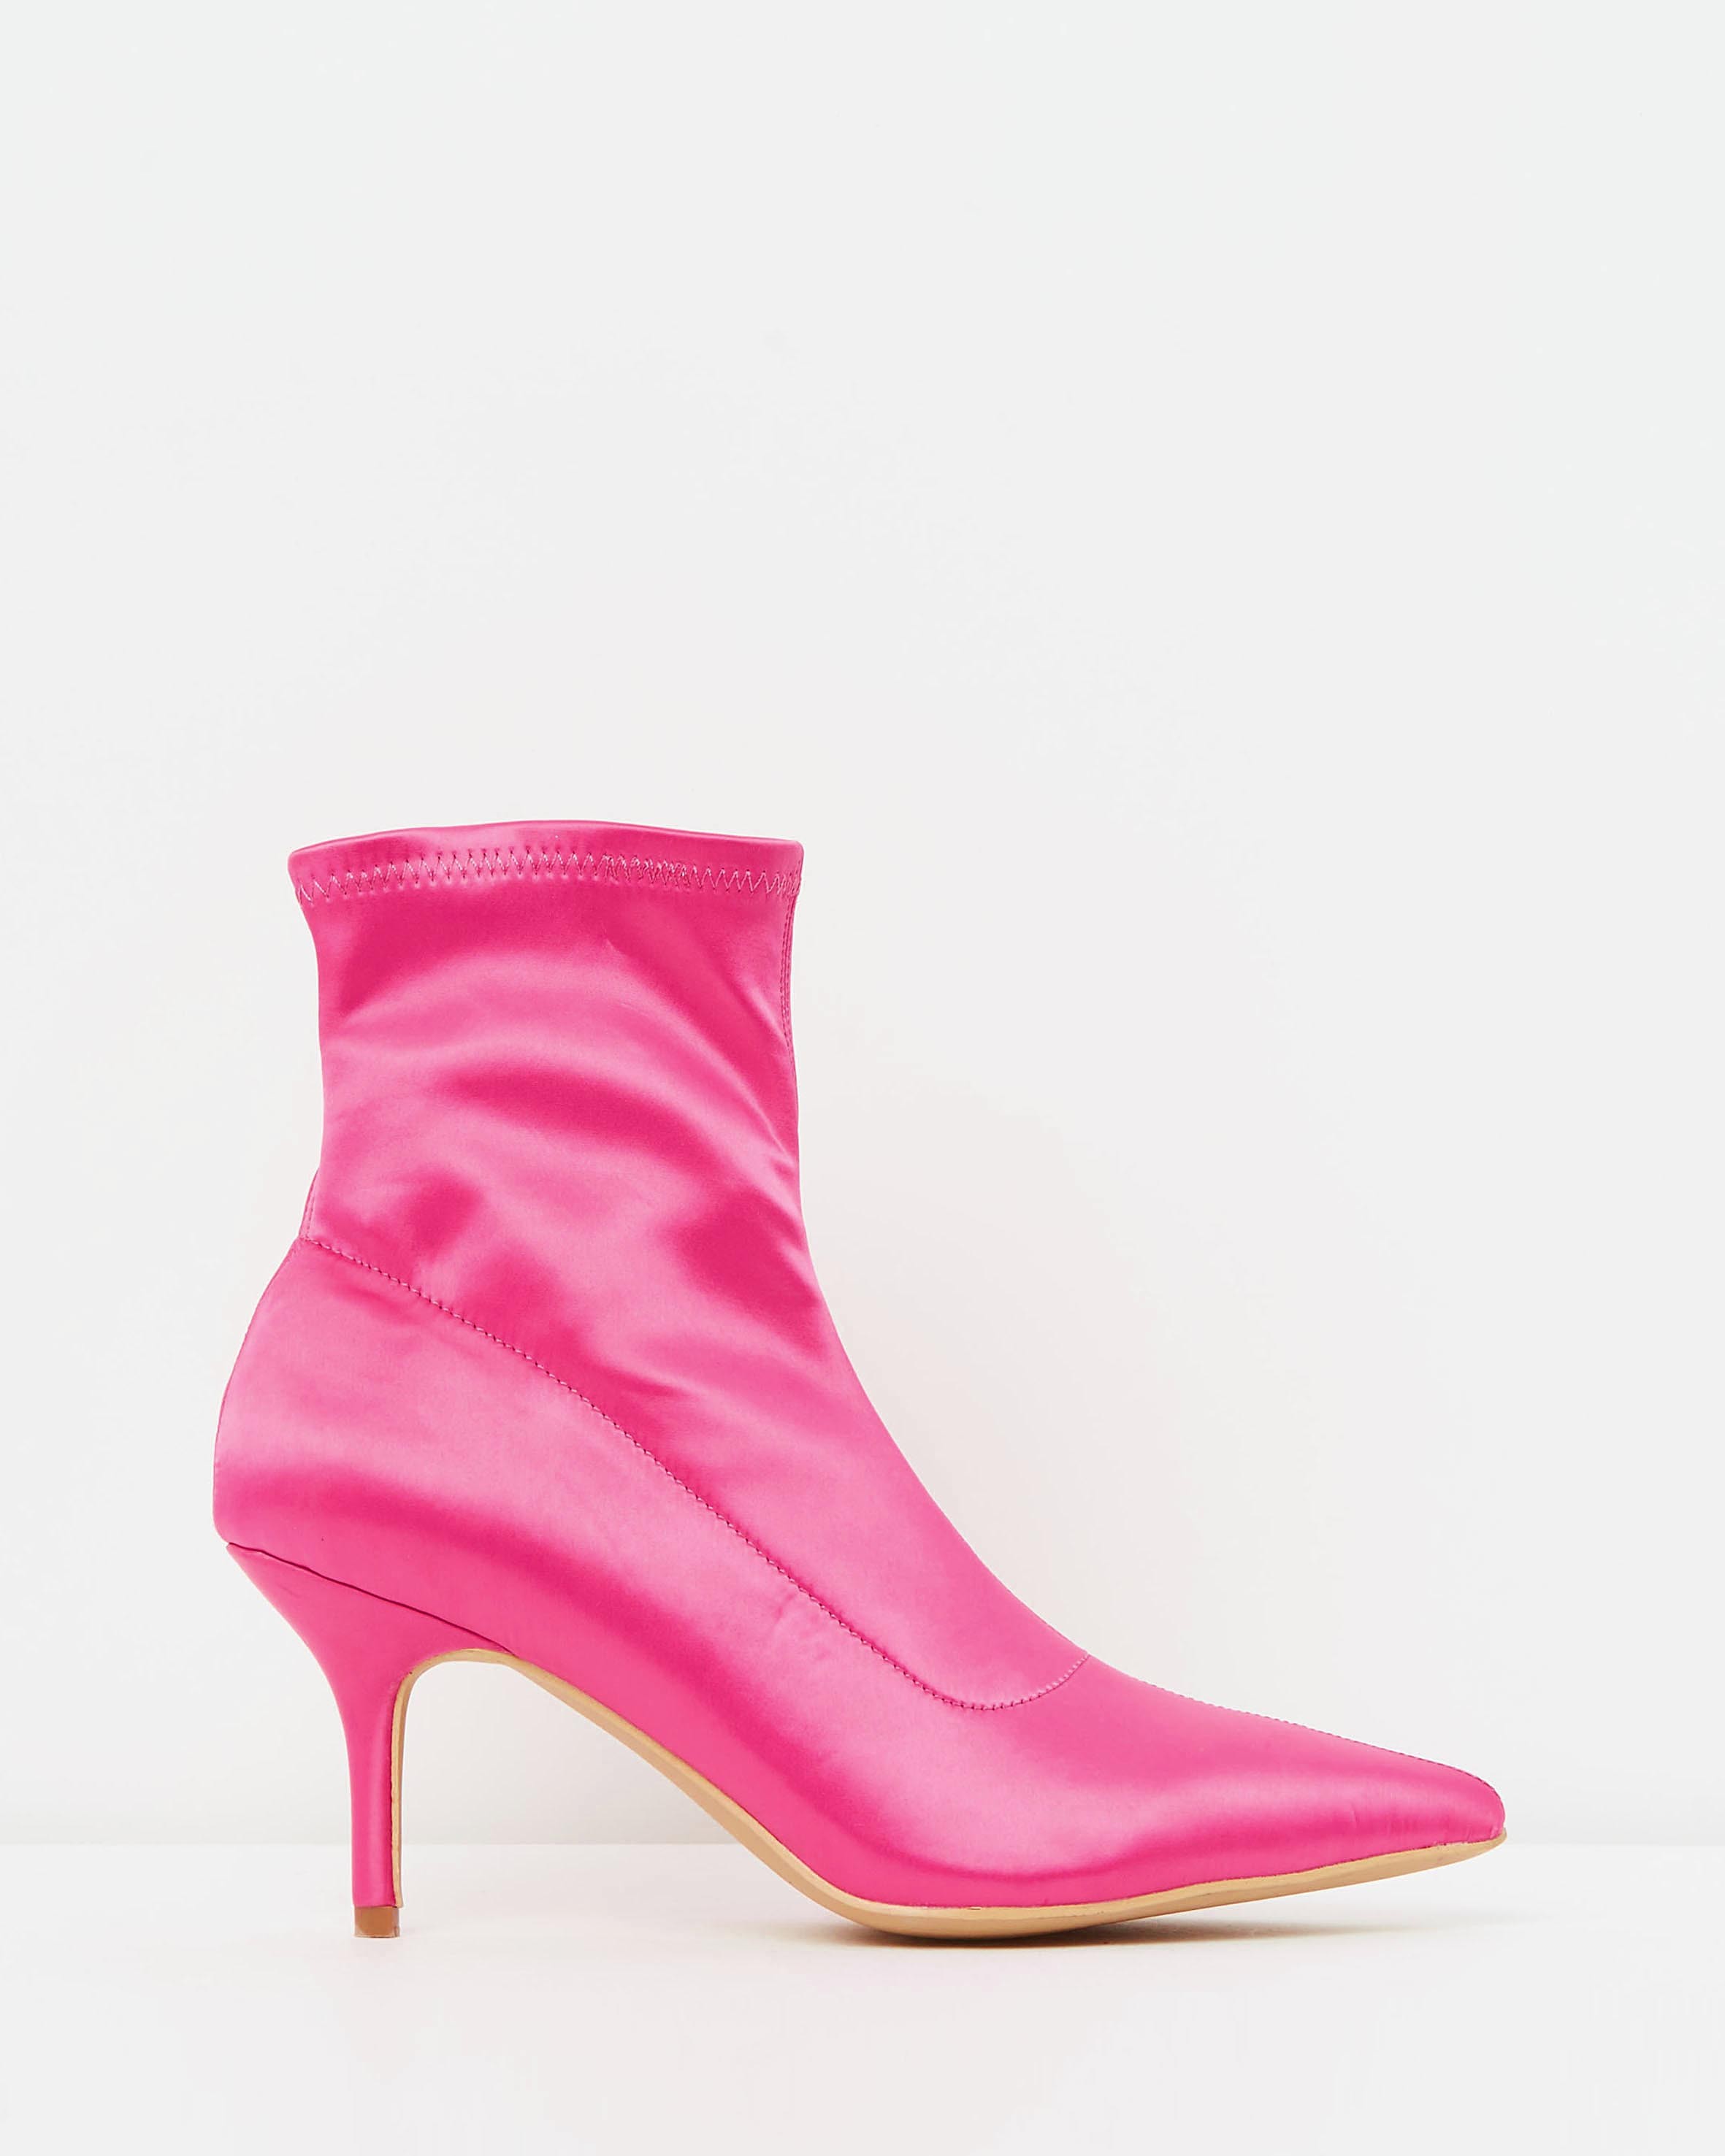 Lizie Ankle Boots Pink Satin by Spurr | ShoeSales